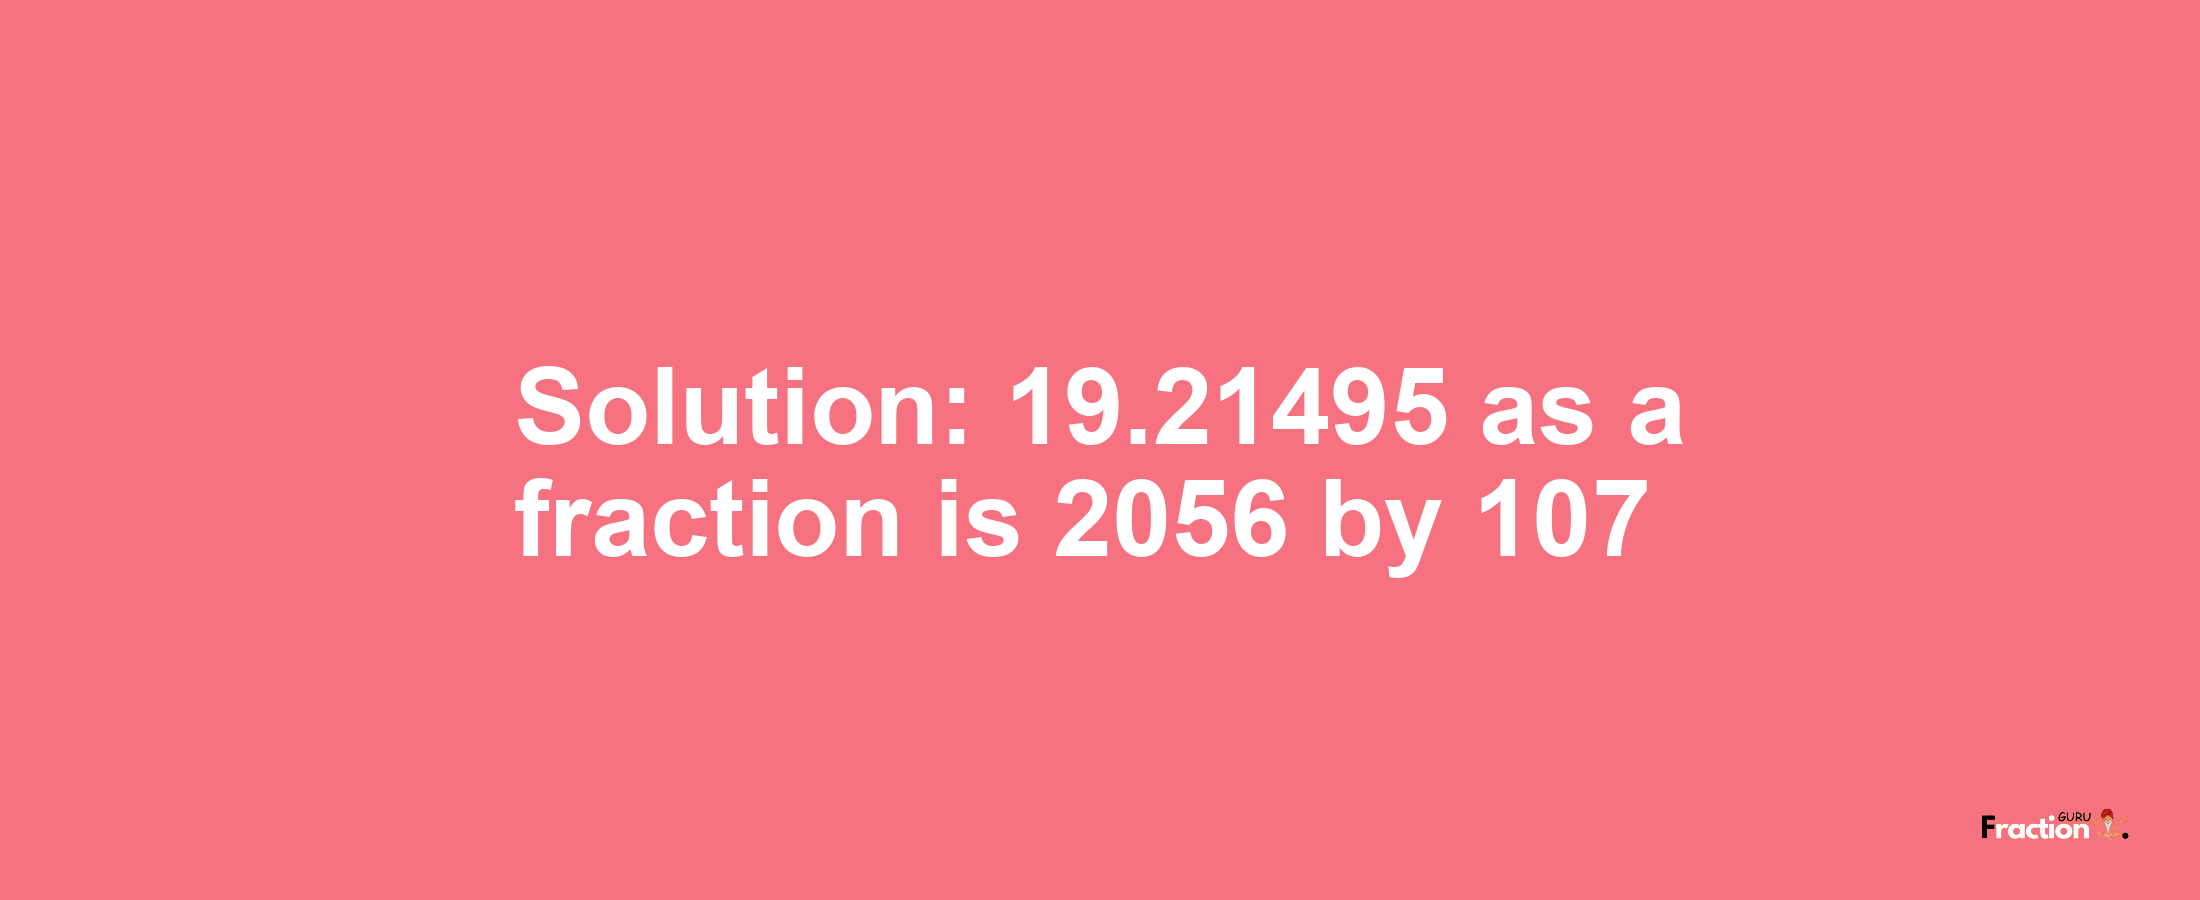 Solution:19.21495 as a fraction is 2056/107